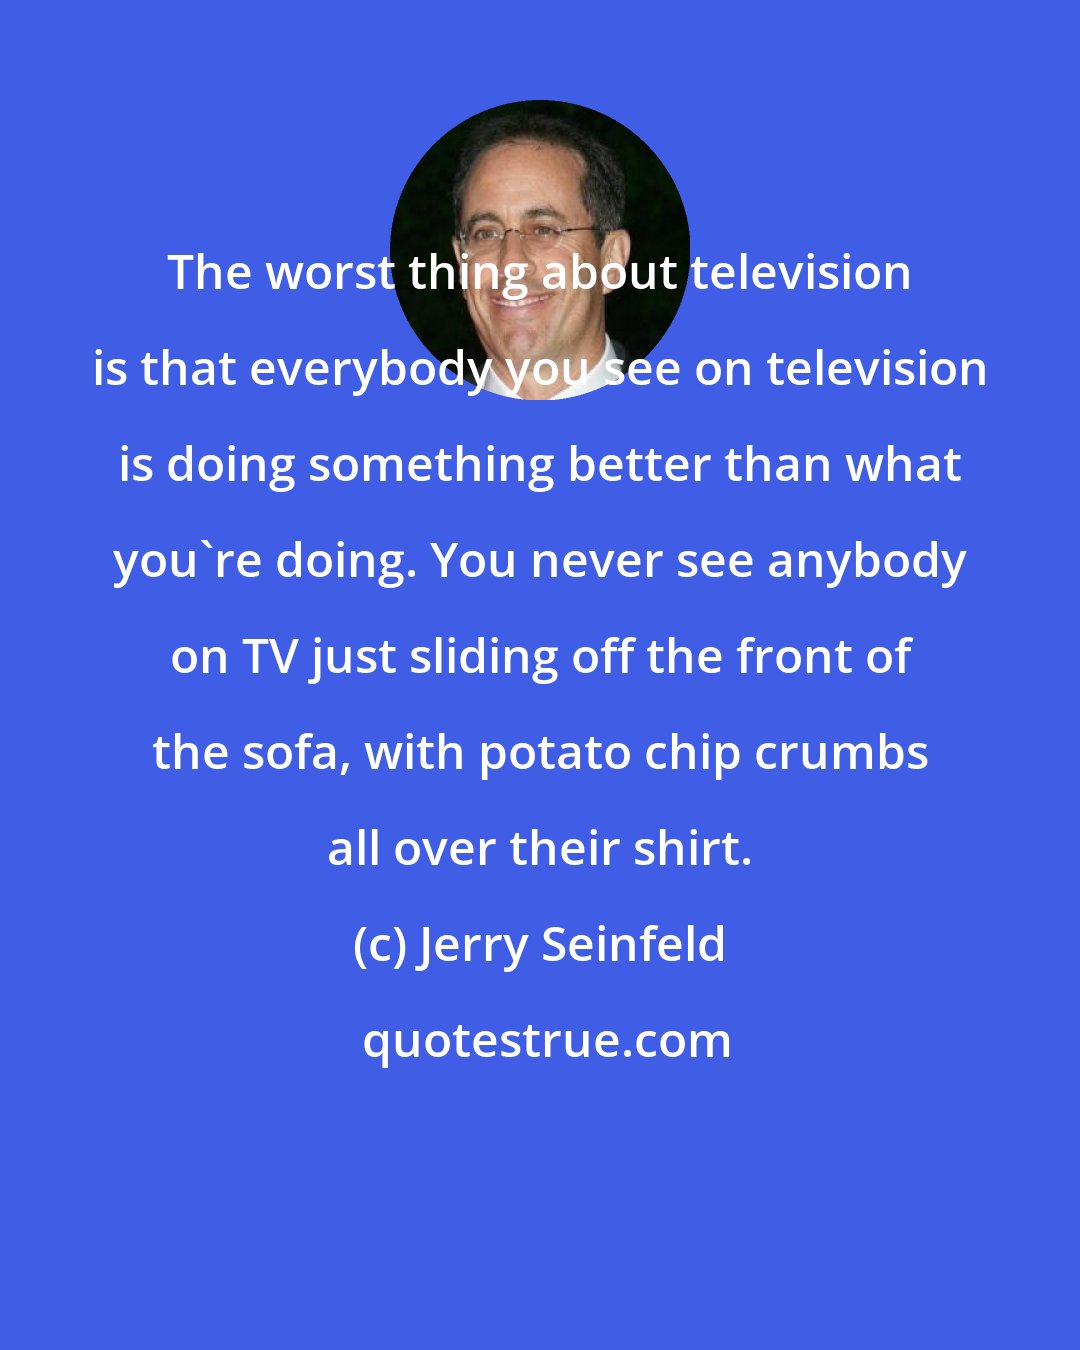 Jerry Seinfeld: The worst thing about television is that everybody you see on television is doing something better than what you're doing. You never see anybody on TV just sliding off the front of the sofa, with potato chip crumbs all over their shirt.